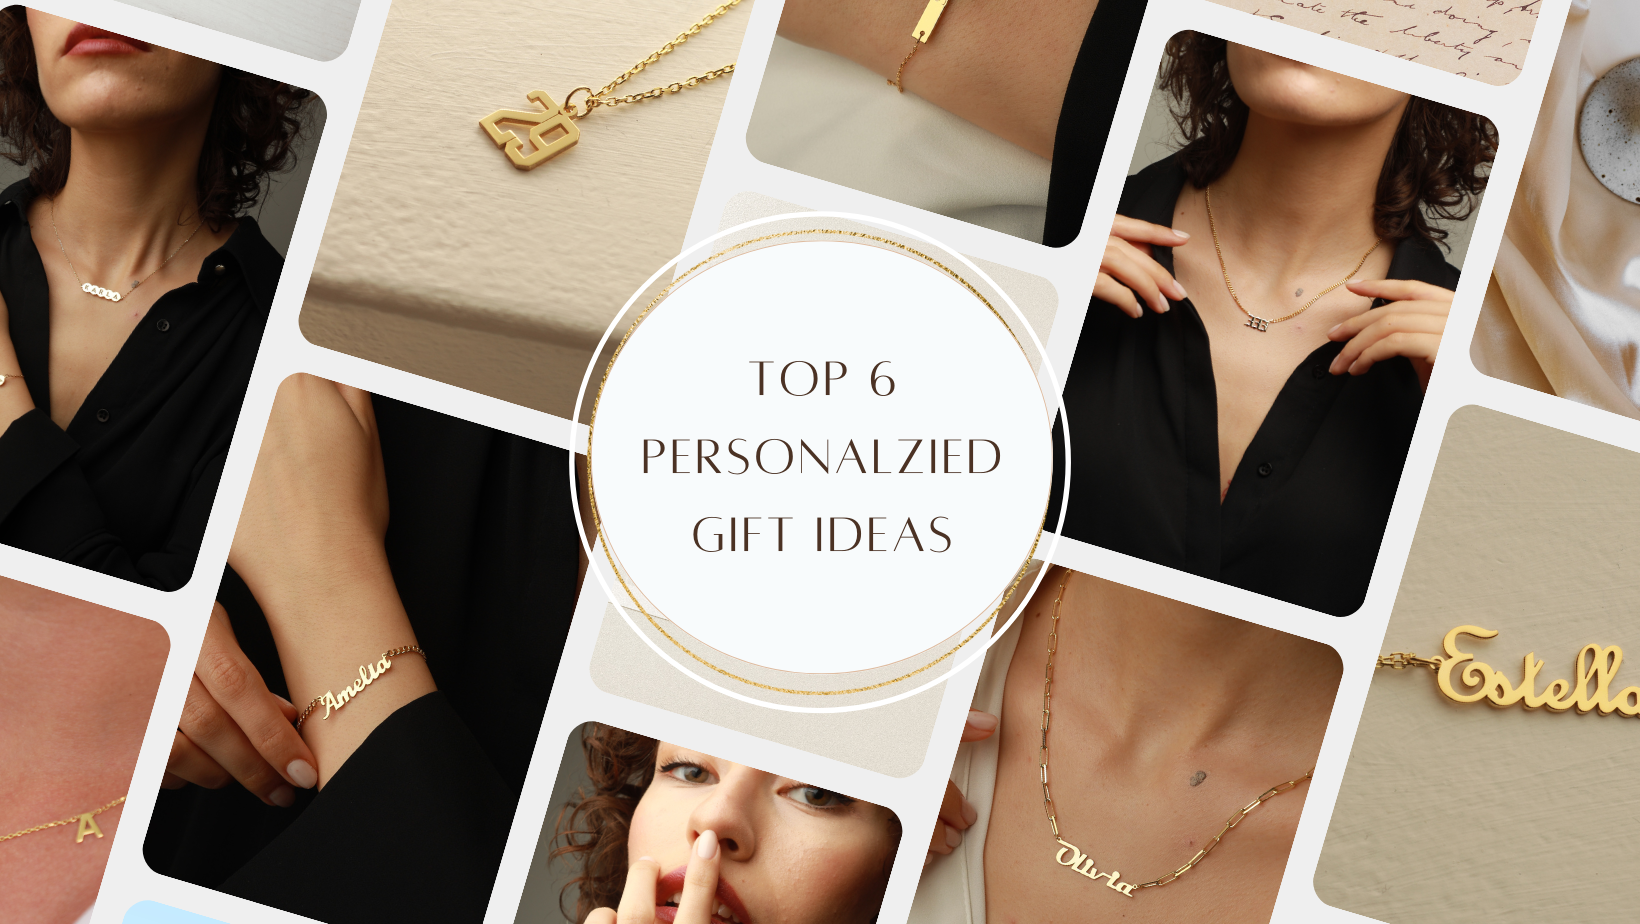 Top 6 Ideas for Personalized Jewelry Gifts